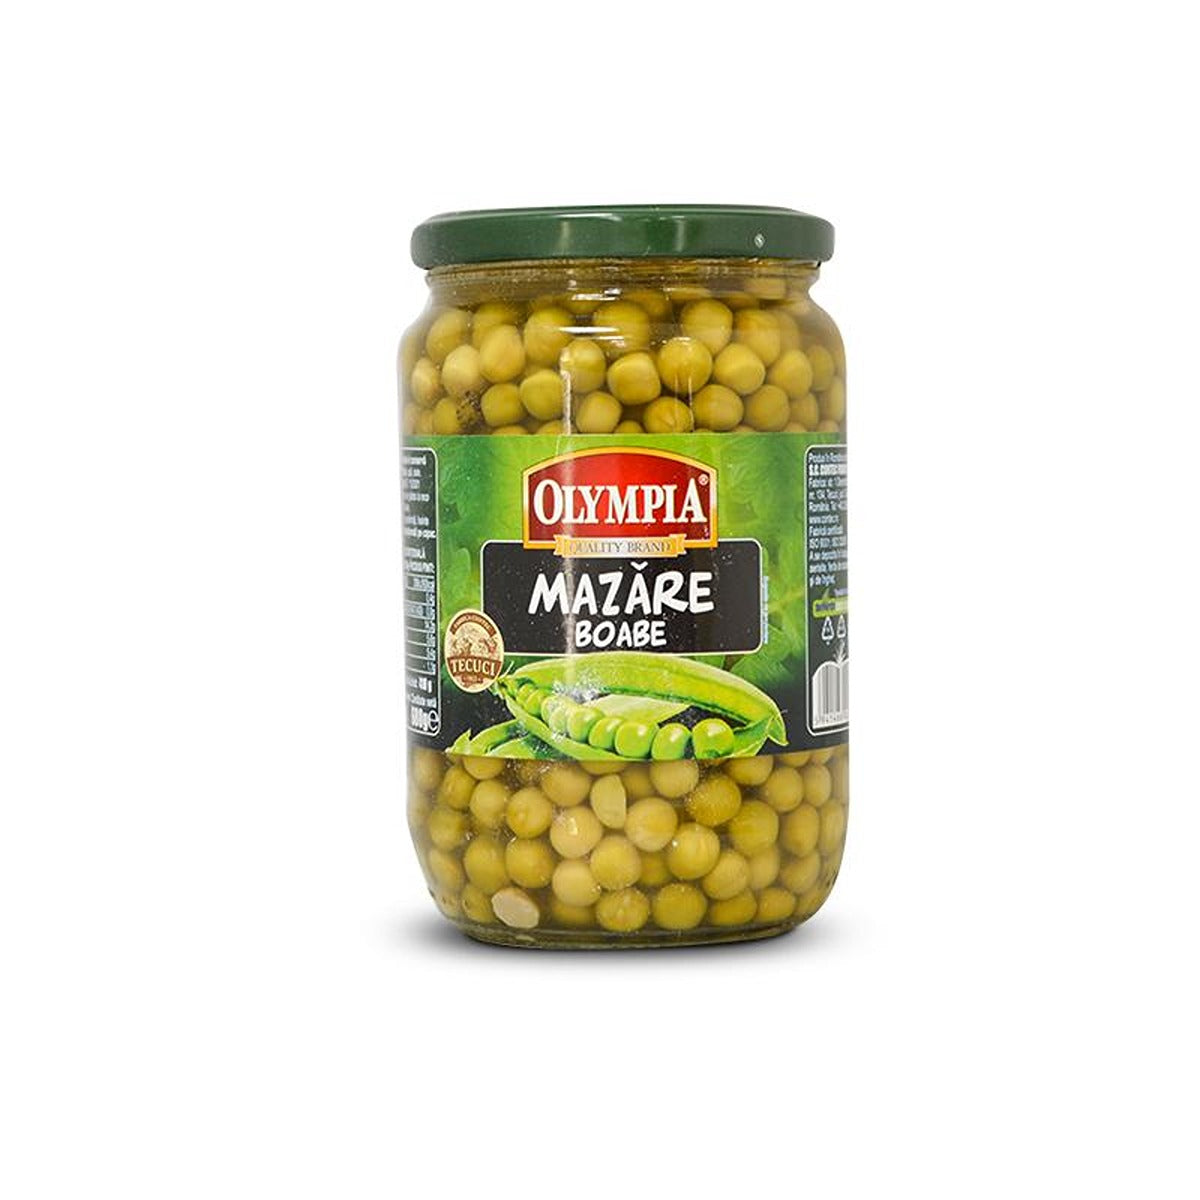 An Olympia - Green Peas - 680g jar on a white background.